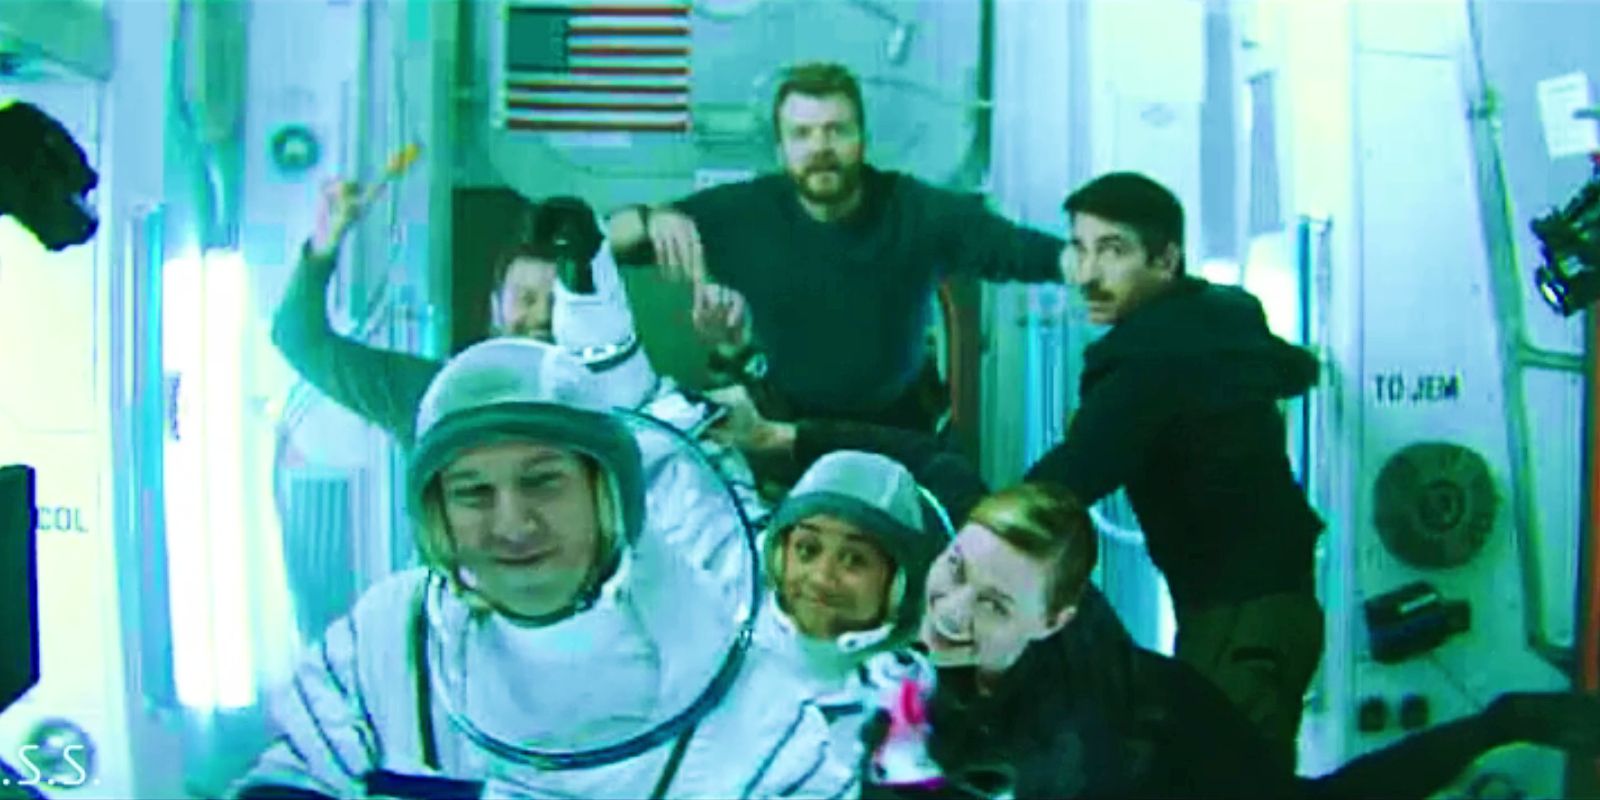 The astronauts pose for a photo in I.S.S.